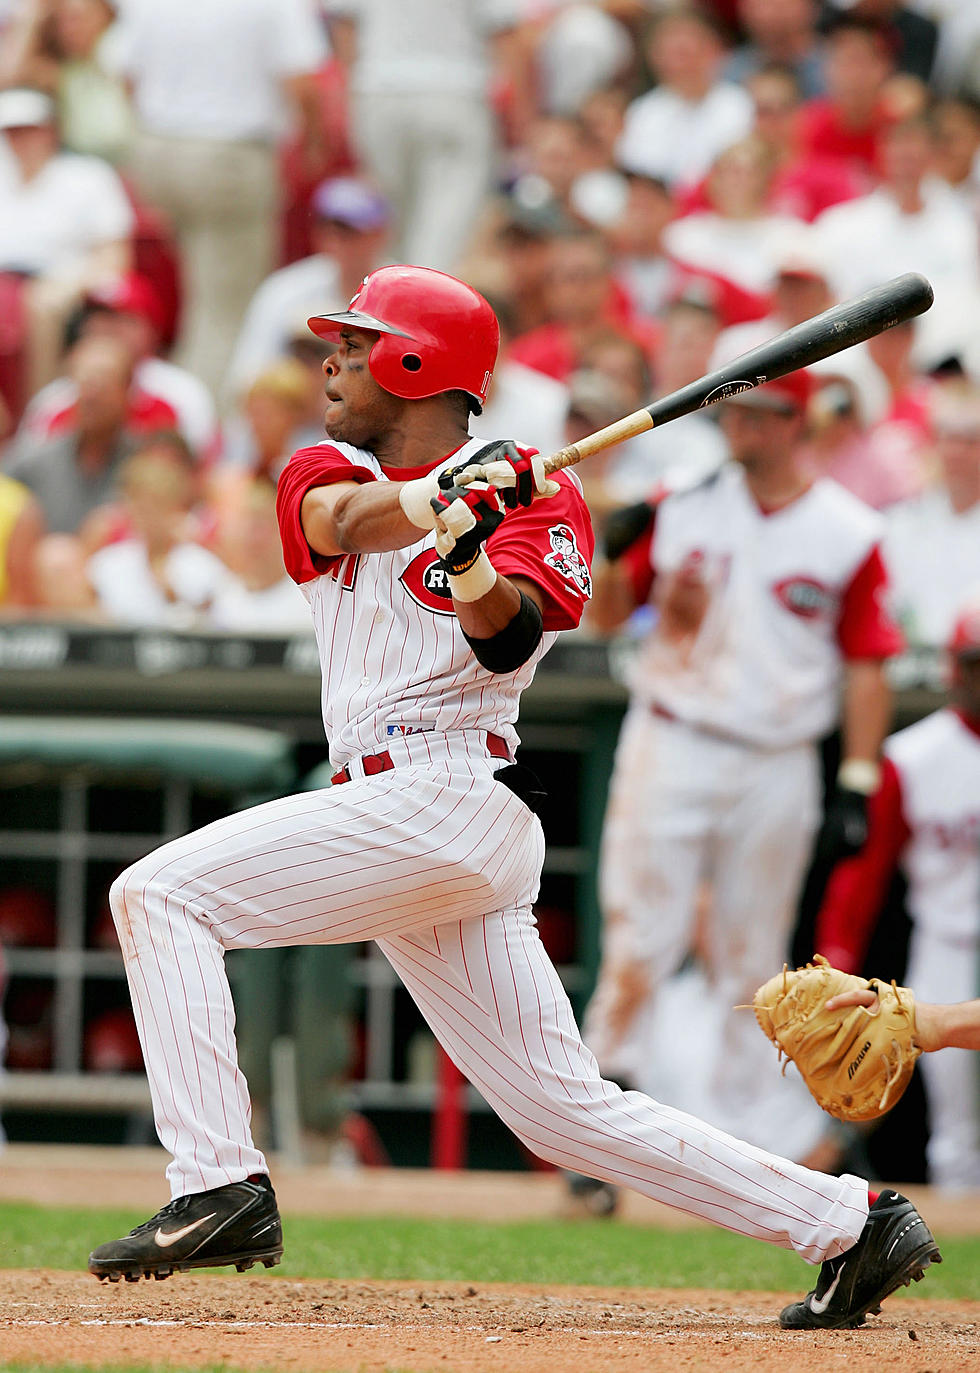 Barry Larkin is Ready, Excited for Hall of Fame Induction